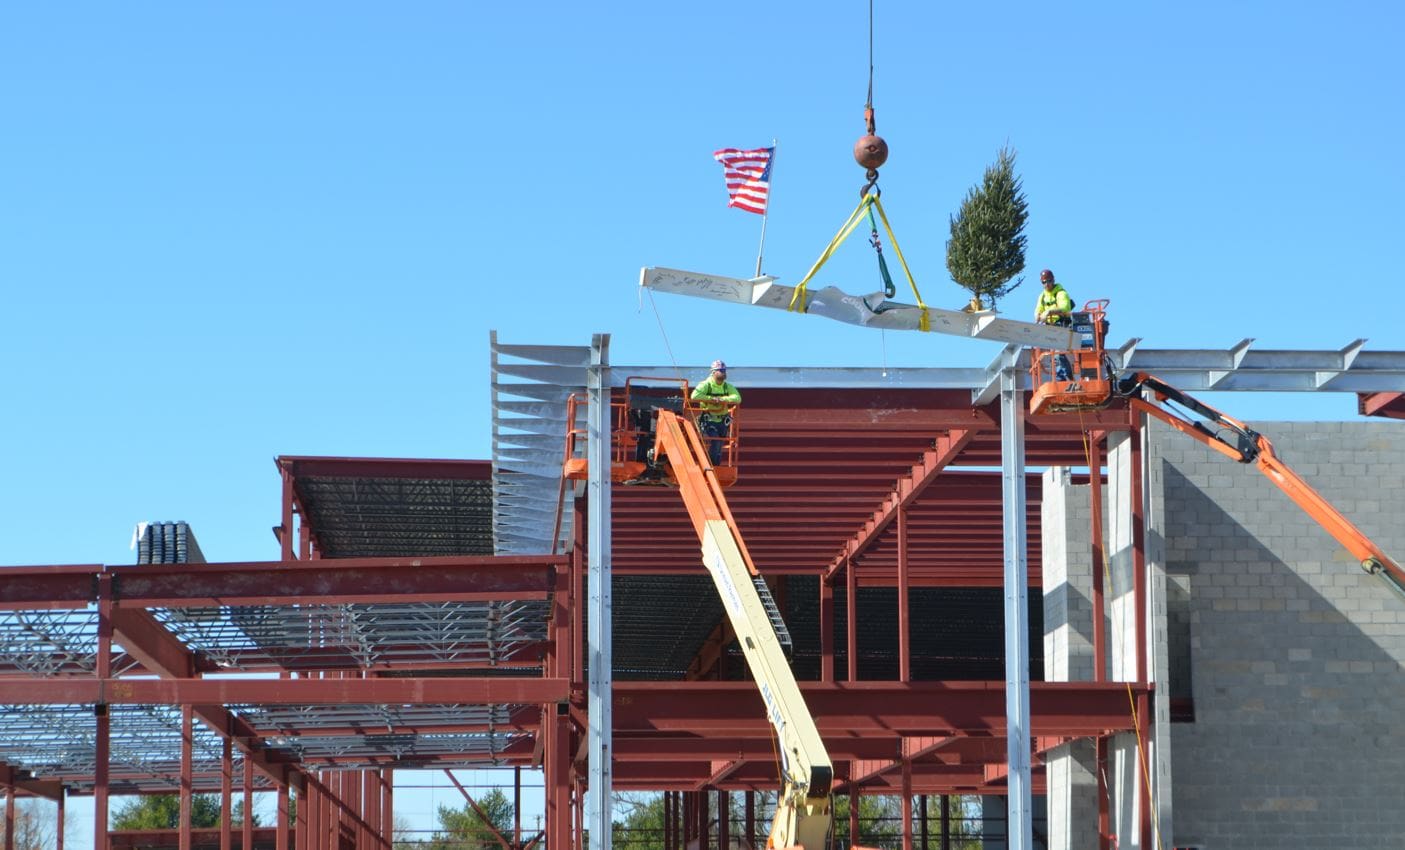 Featured image for “Food Bank celebrates topping off new Milford building”